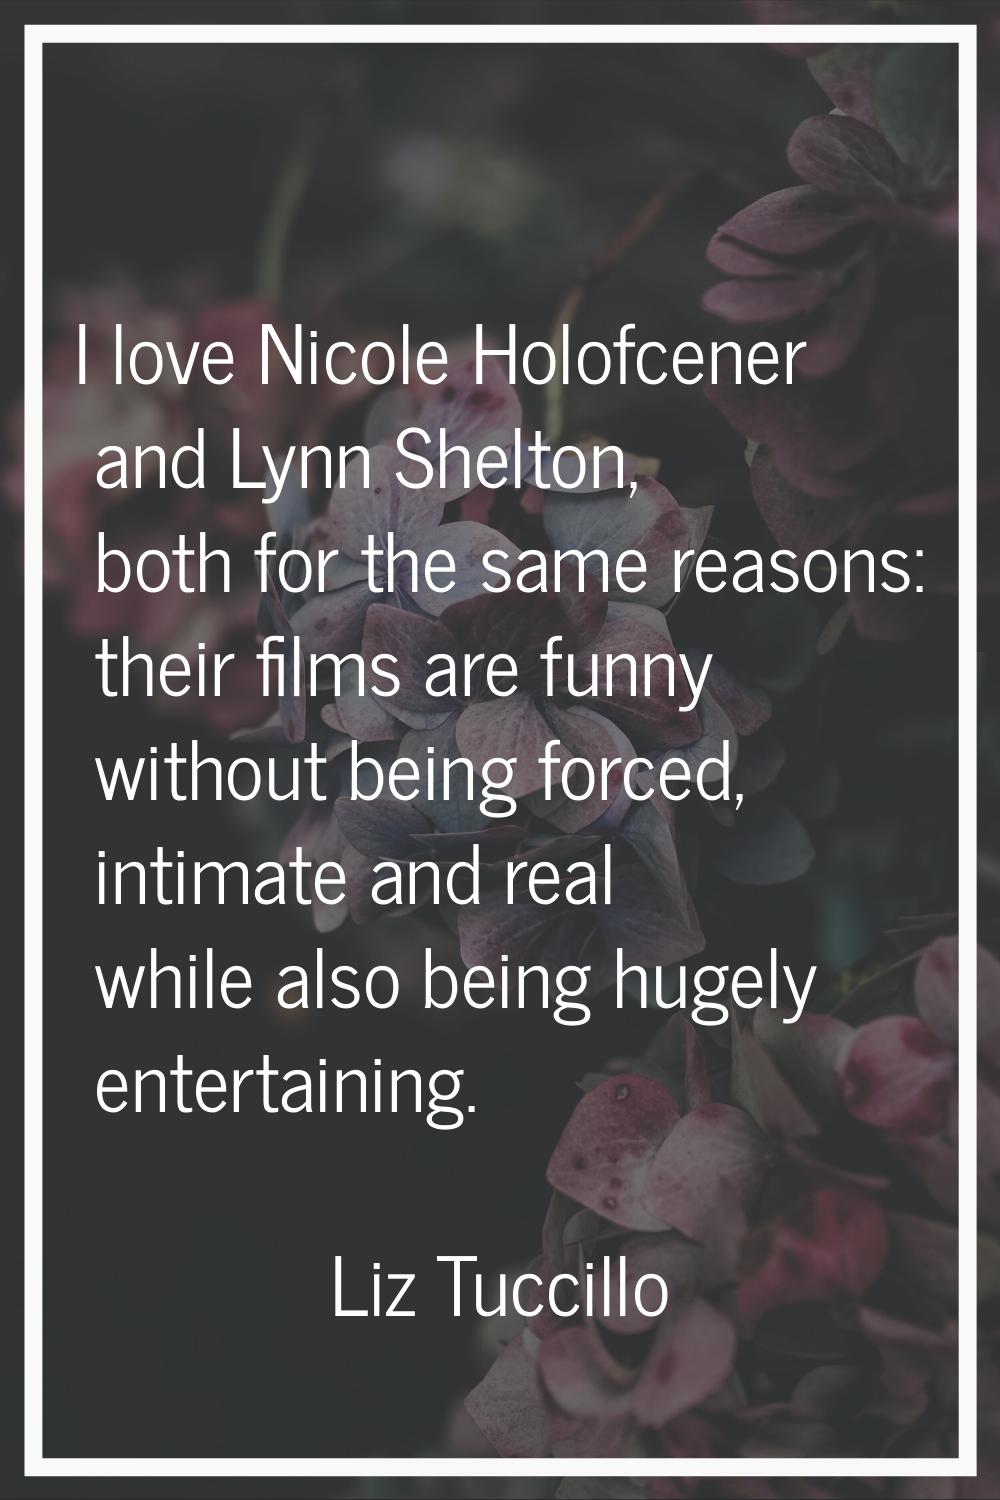 I love Nicole Holofcener and Lynn Shelton, both for the same reasons: their films are funny without